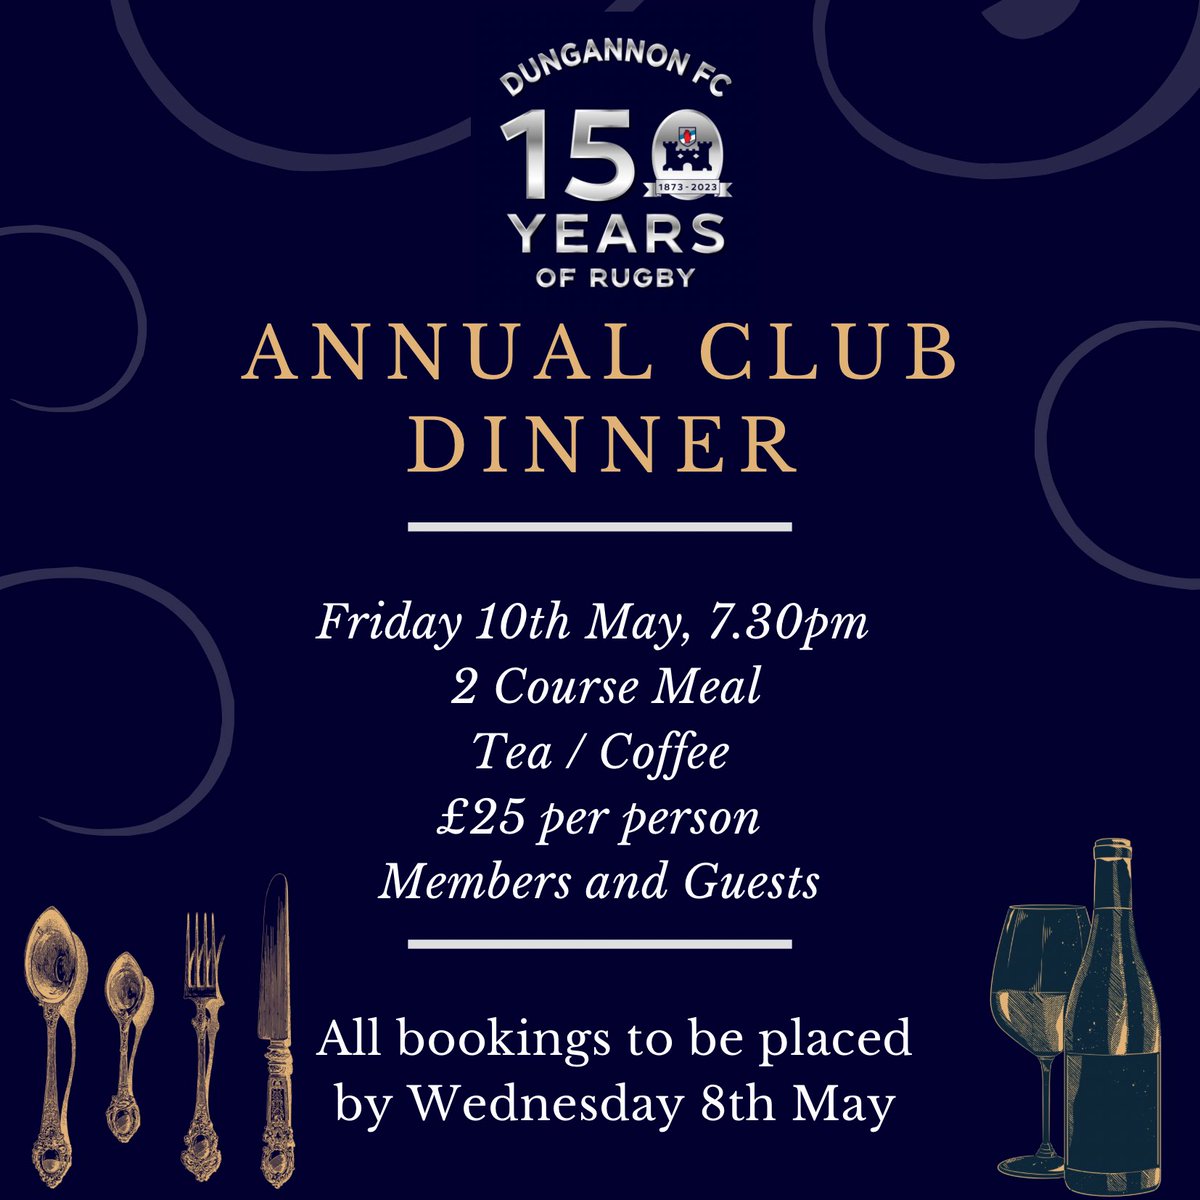 Club Dinner can now be booked for members from the club office Mon-Thurs 9-4pm or at the club AGM on Friday 3rd May starting at 8pm.